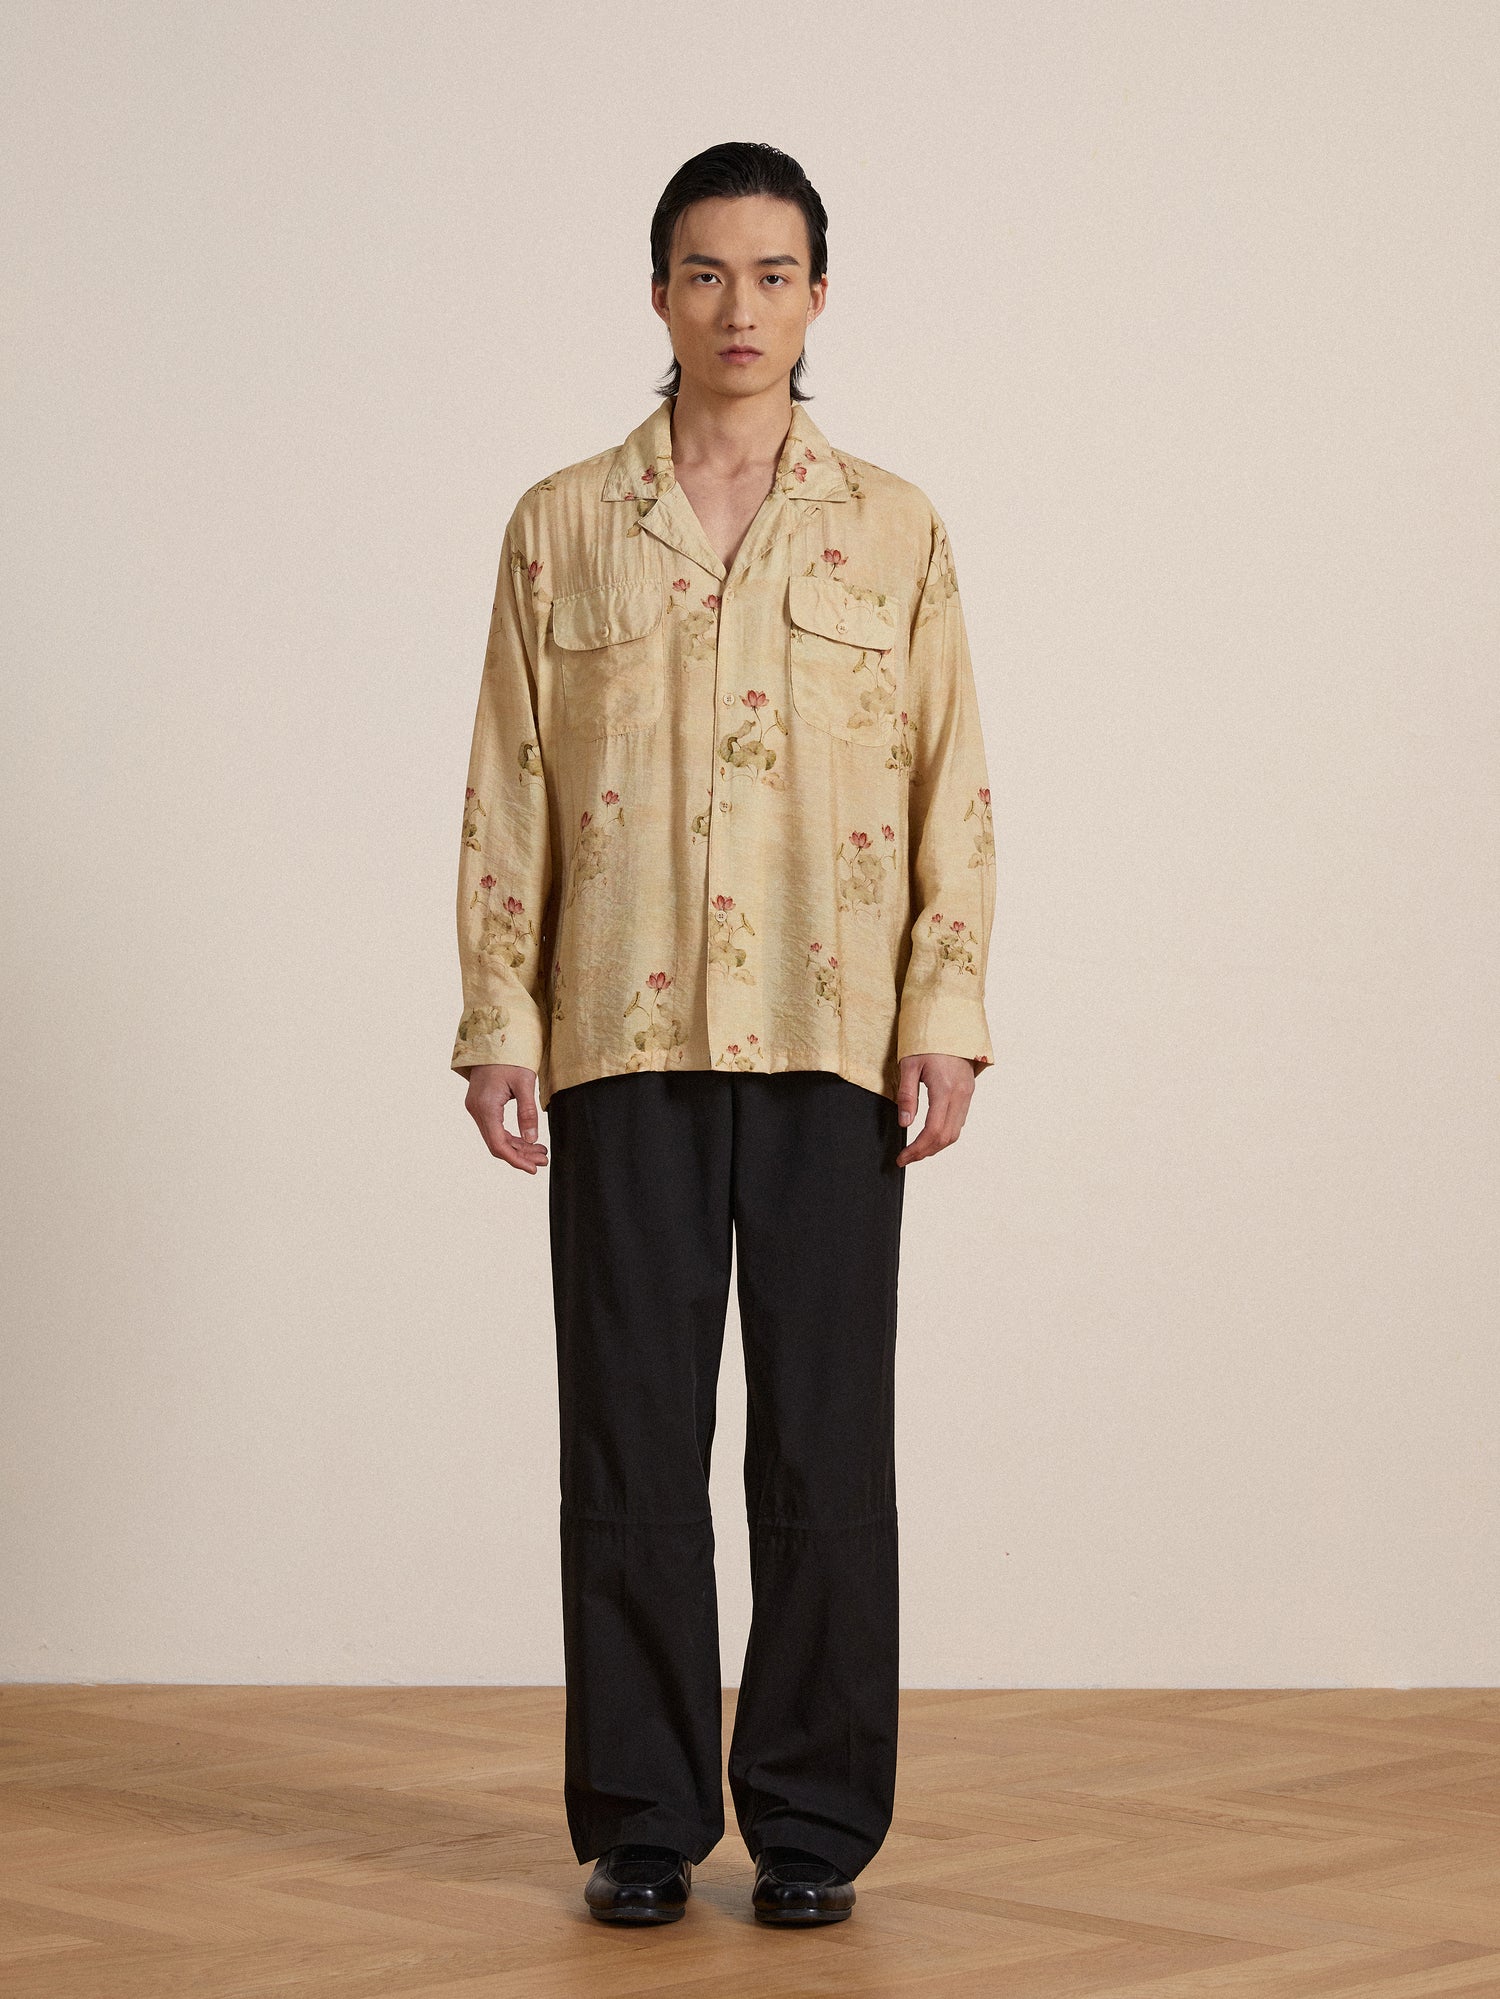 A man wearing a beige Found Lotus LS Camp Shirt and black pants.